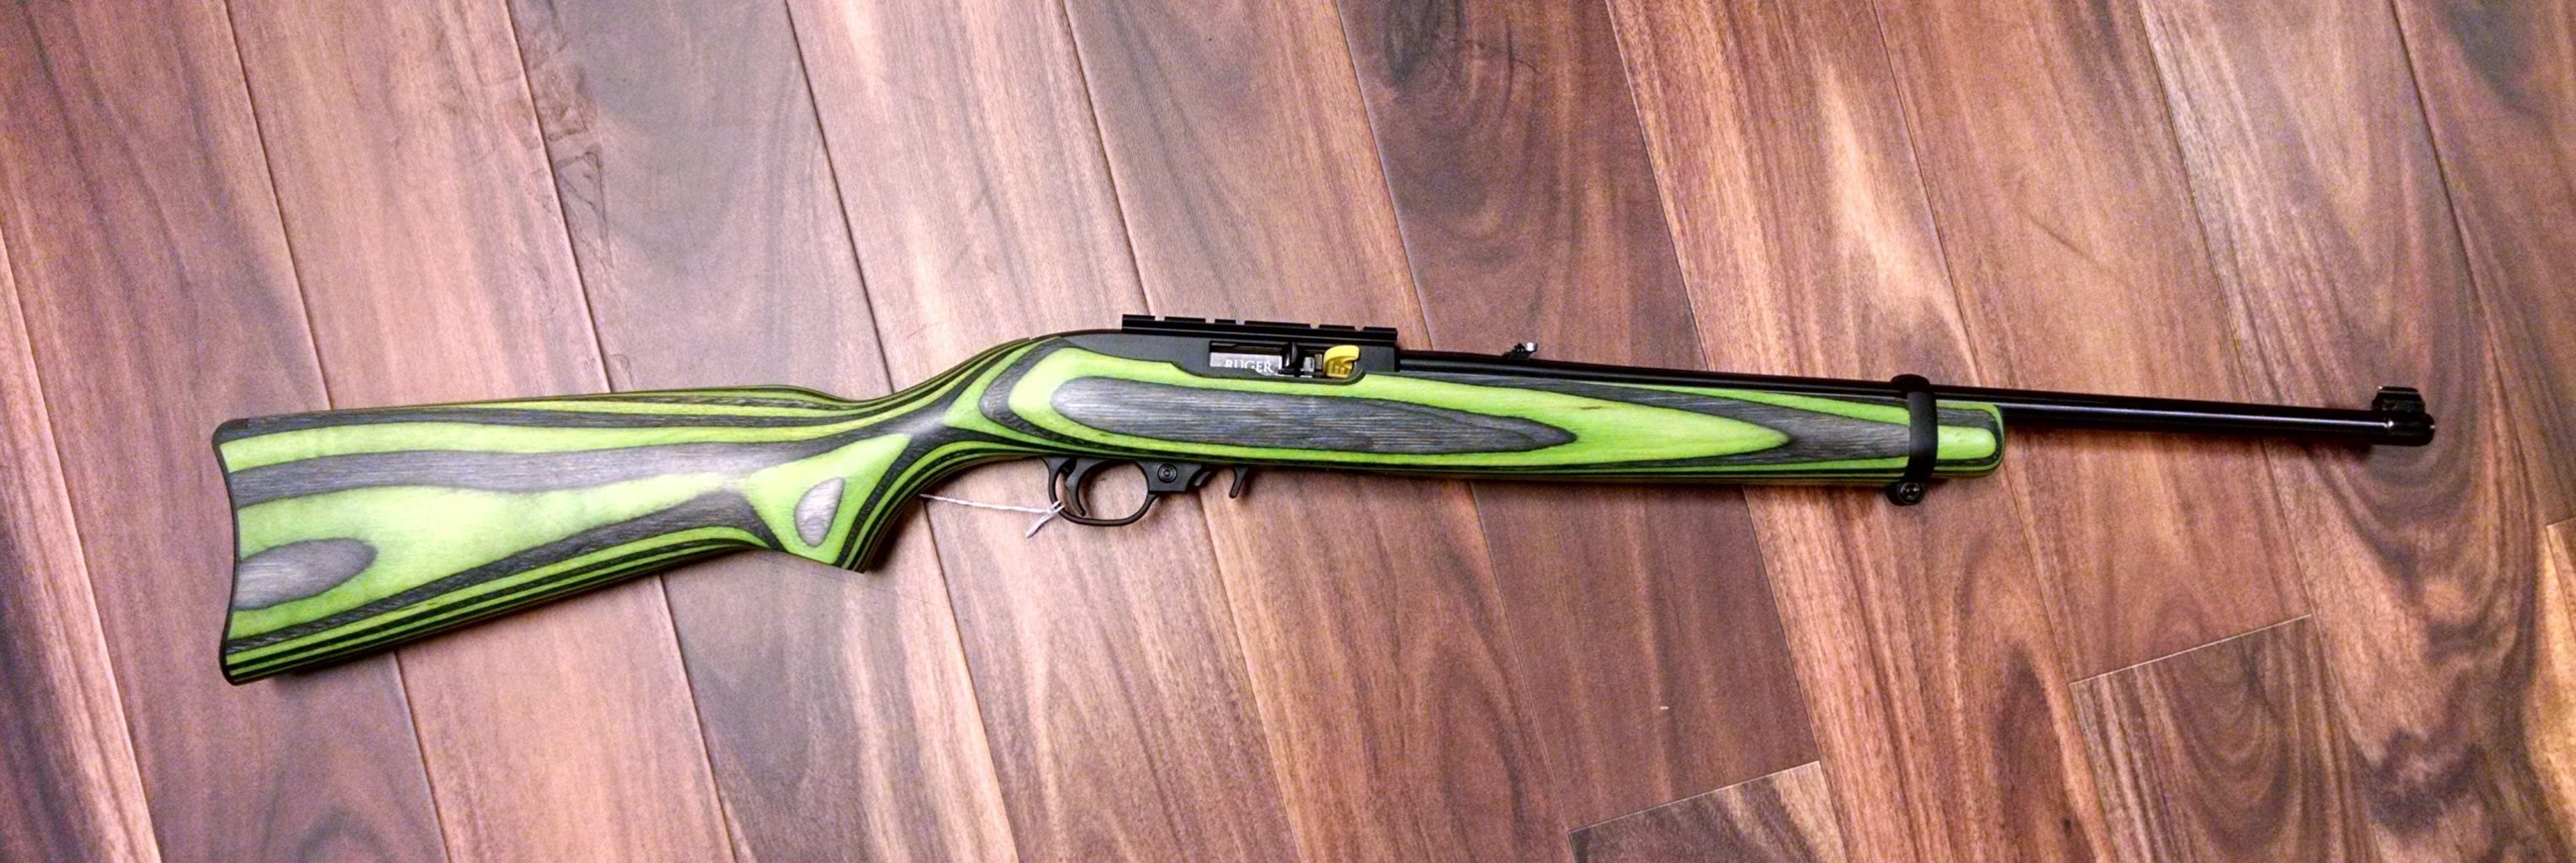 RUGER 10/22 GREEN BLACK .22LR RIFLE SPECIAL EDITION